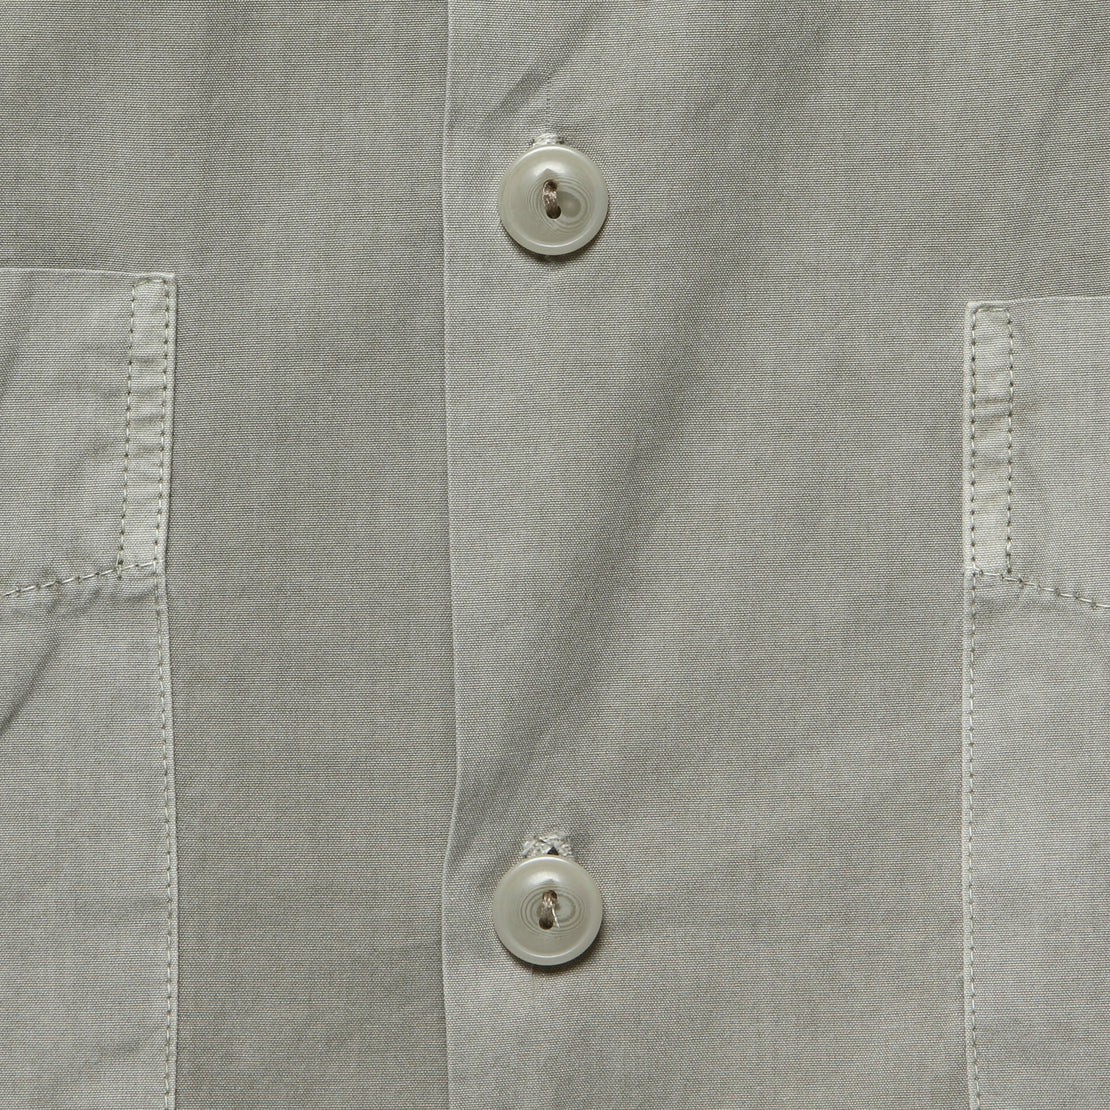 Fatigue Camp Shirt - Khaki - Save Khaki - STAG Provisions - Tops - S/S Woven - Solid